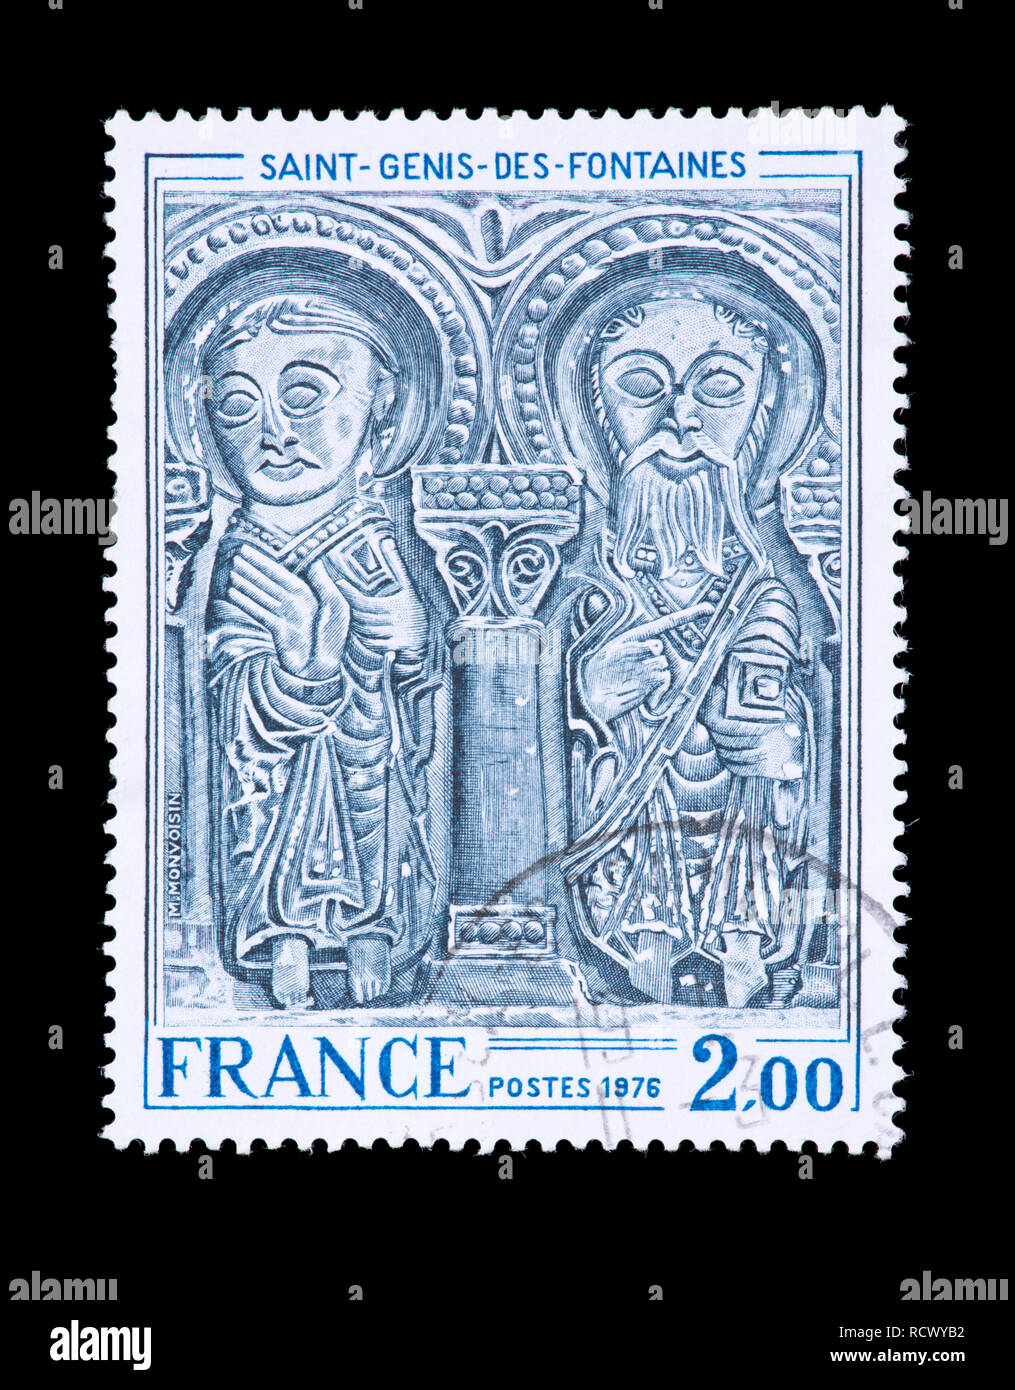 Postage stamp from France depicting Lintel, St. Genis des Fontaines Church. Stock Photo